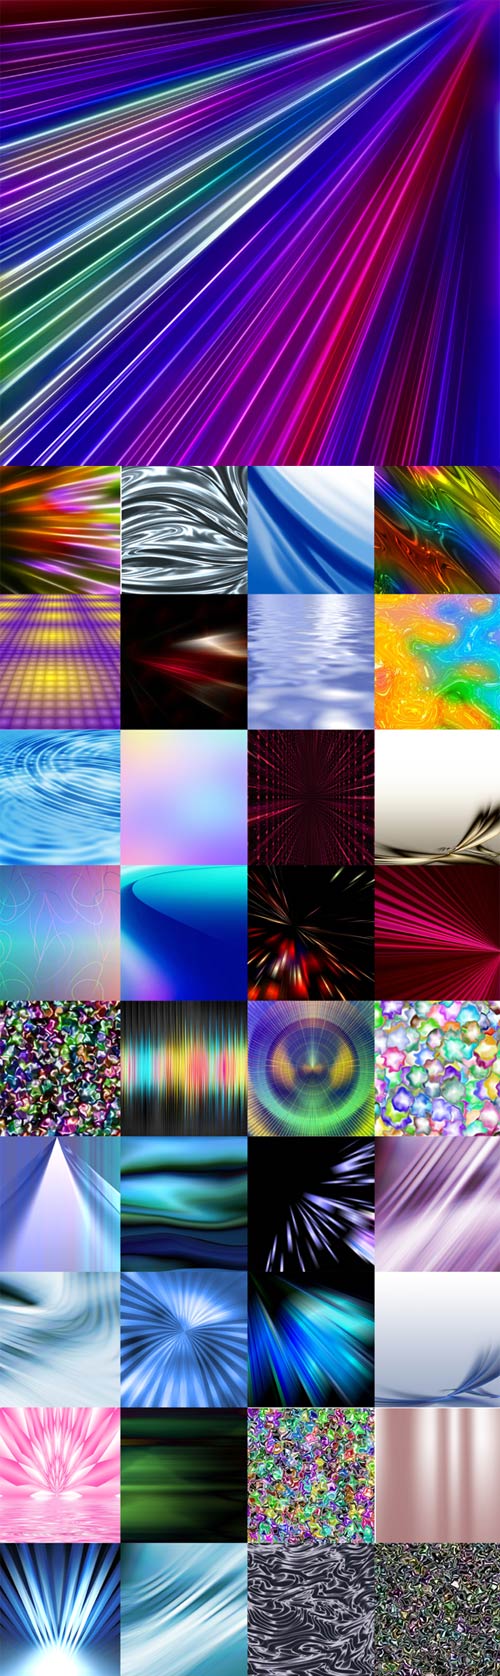 Colorful abstract backgrounds jpg 6